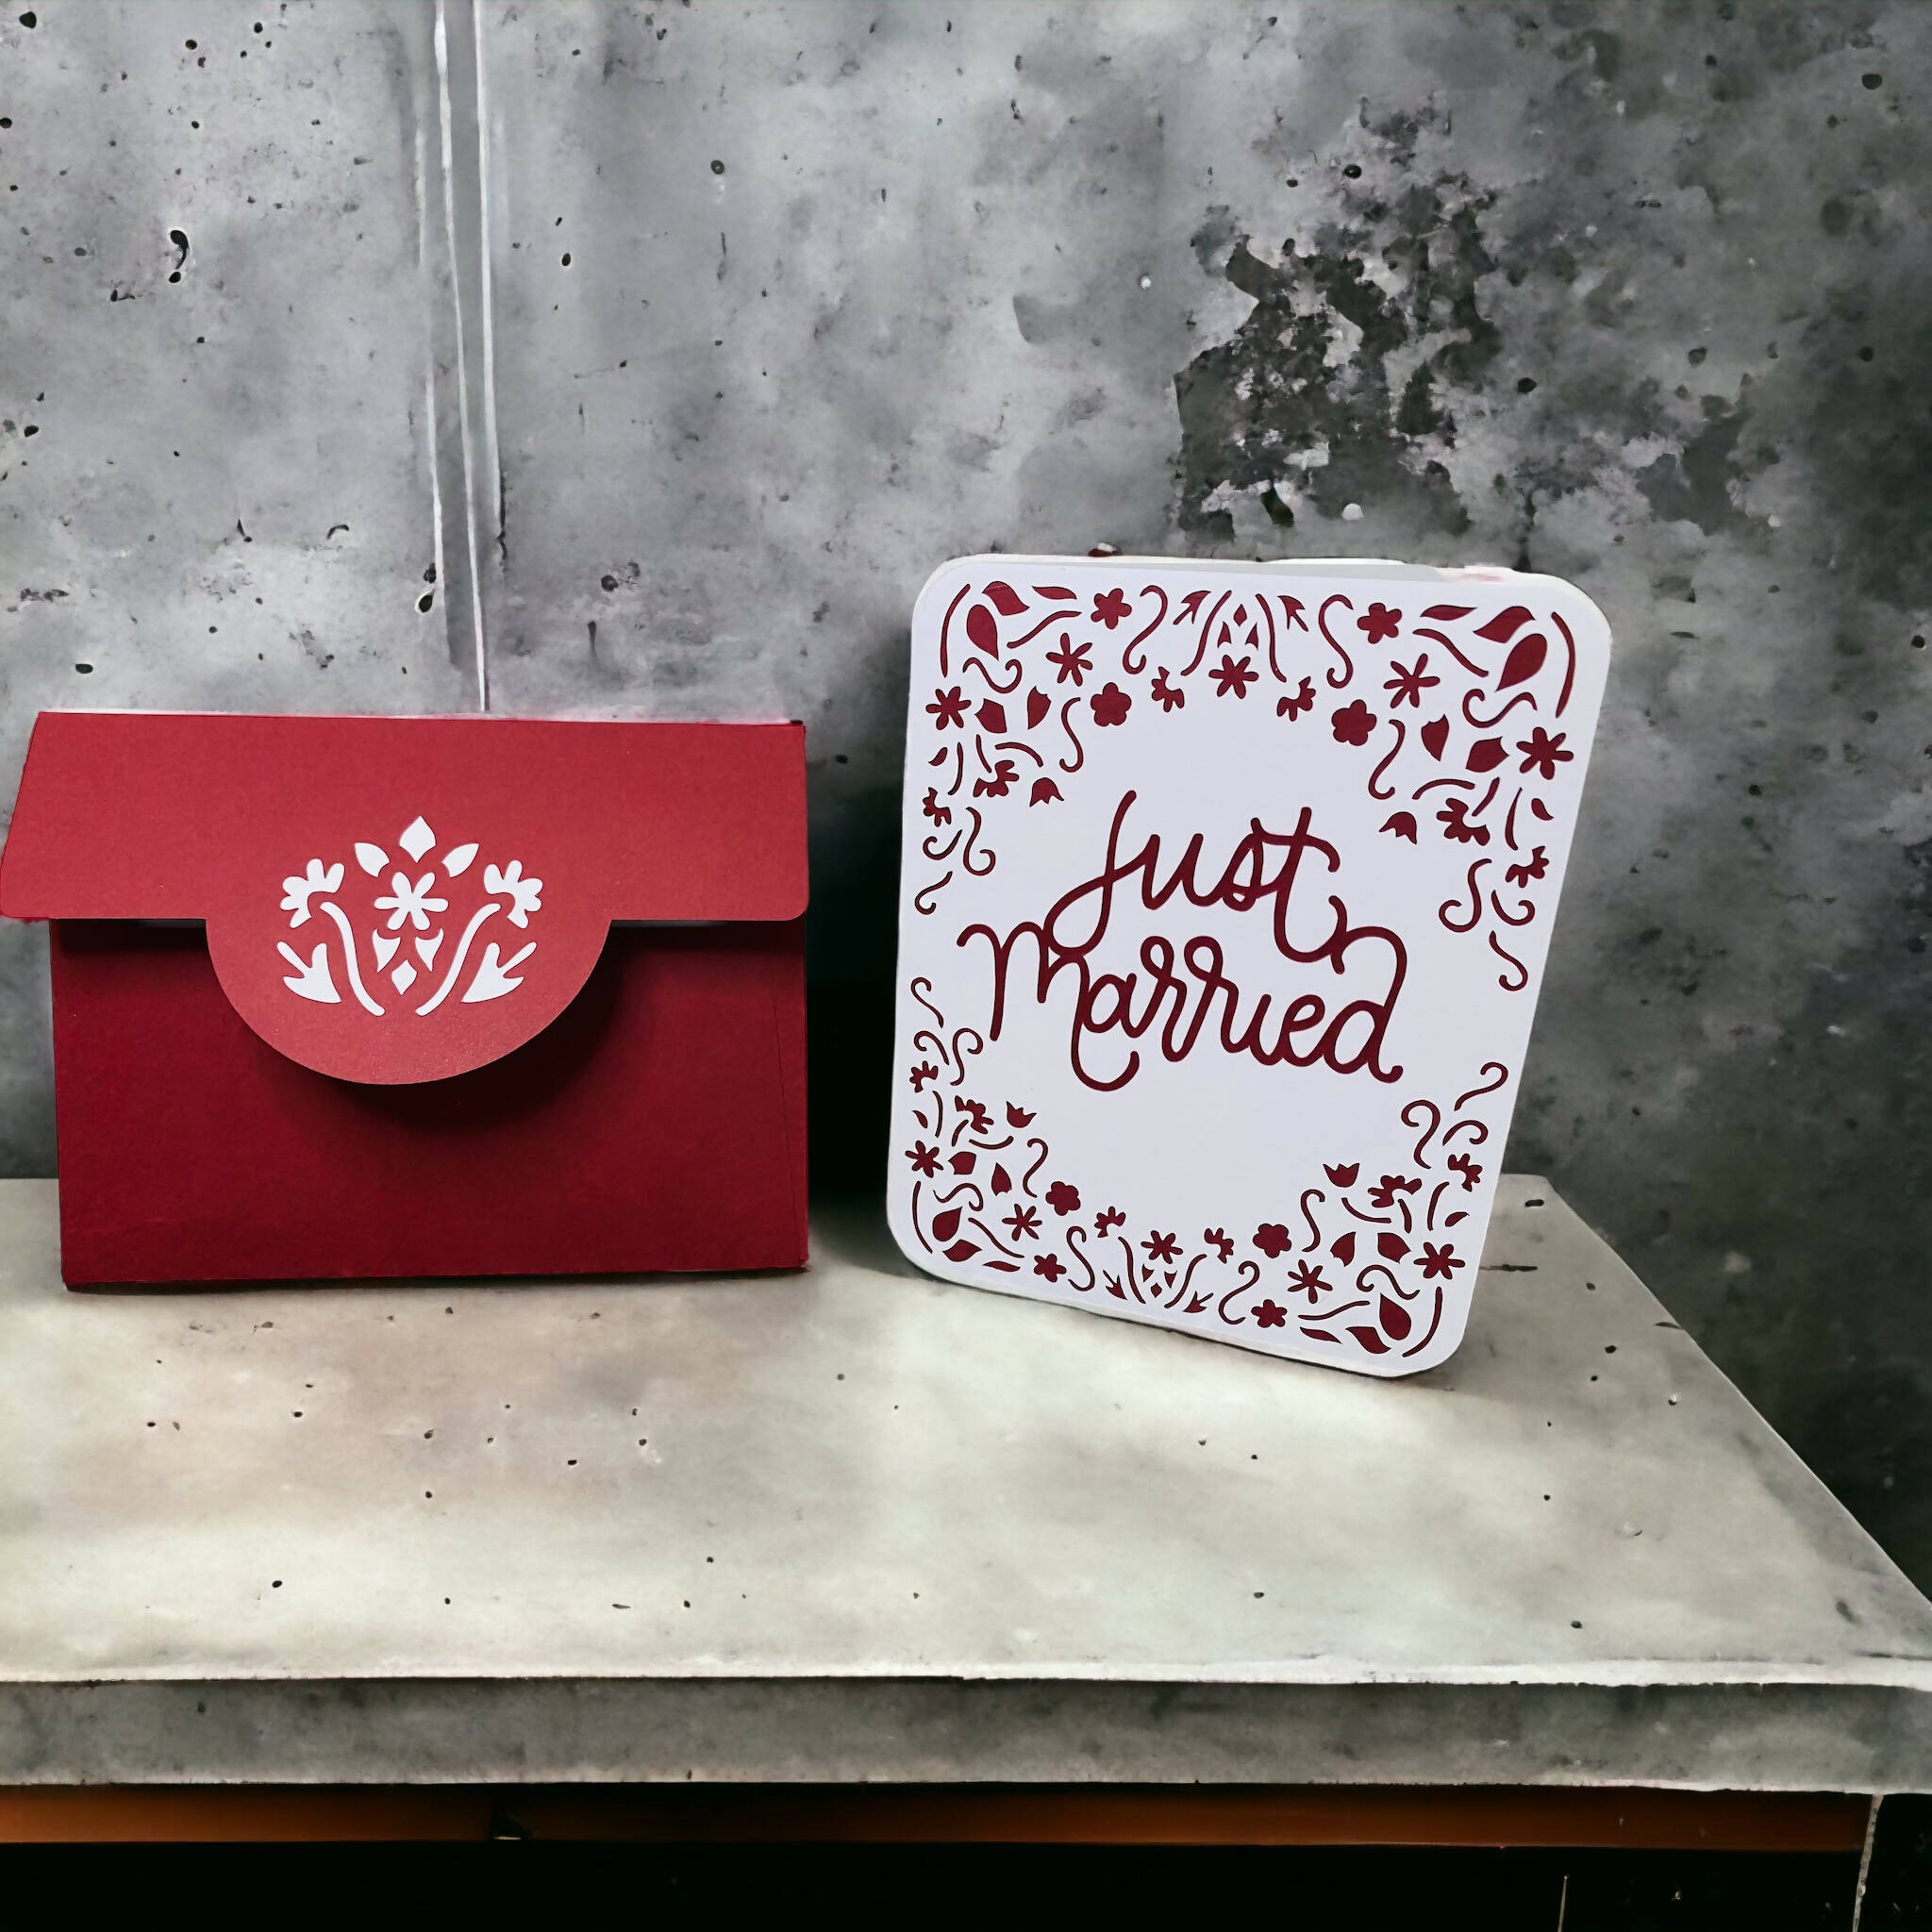 Jam Intricate just married card and envelope